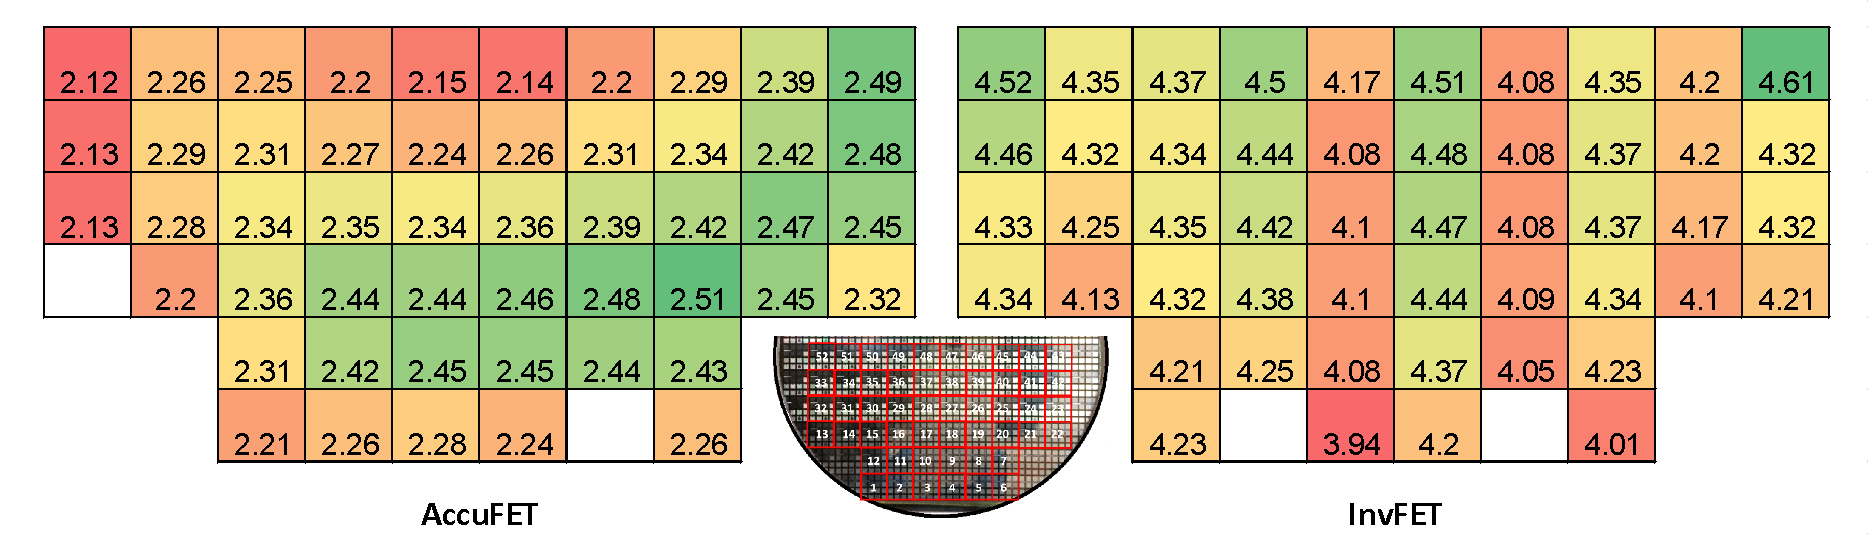 Fig. 9. Distribution of threshold voltages of SiC AccuFETs and InvFETs fabricated on 6-inch SiC wafers. A half-cut picture of a fully processed 6-inch wafer is also shown in the middle. Threshold voltages of AccuFETs show radial pattern across the wafer while those of InvFETs show random distribution.